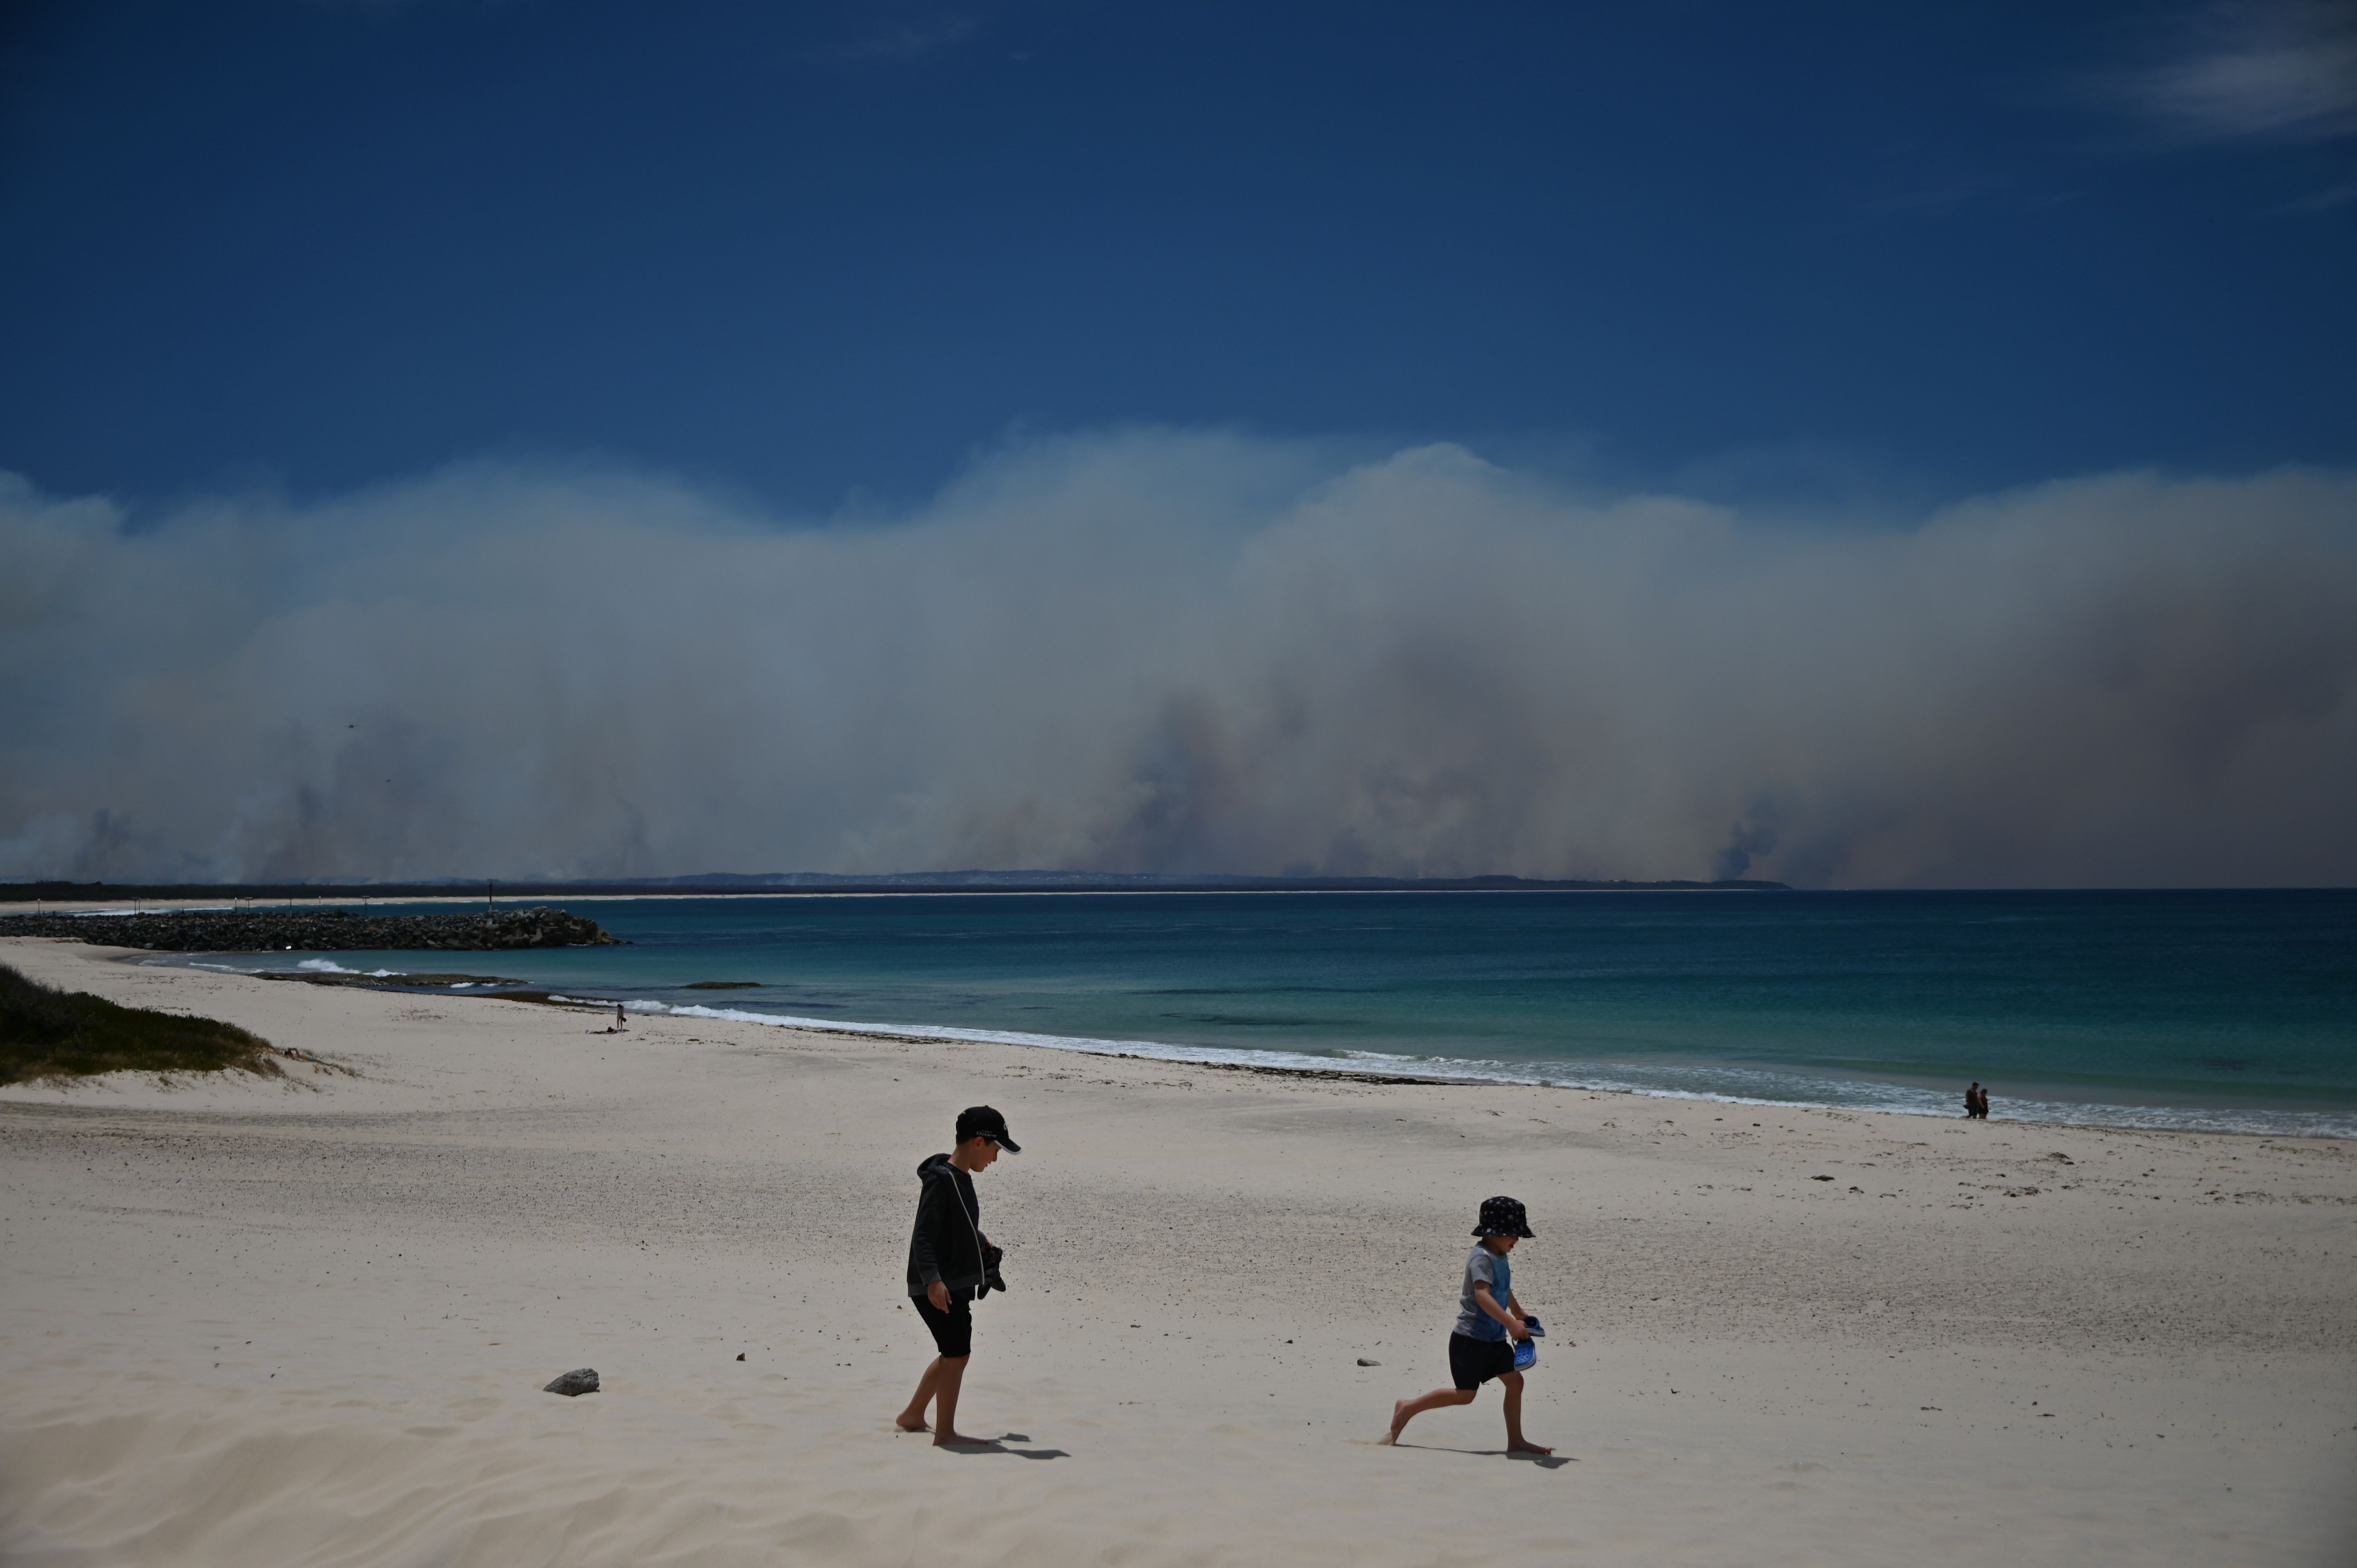 Bushfires burn in the distance as children play on a beach in Forster, 300km north of Sydney on November 9